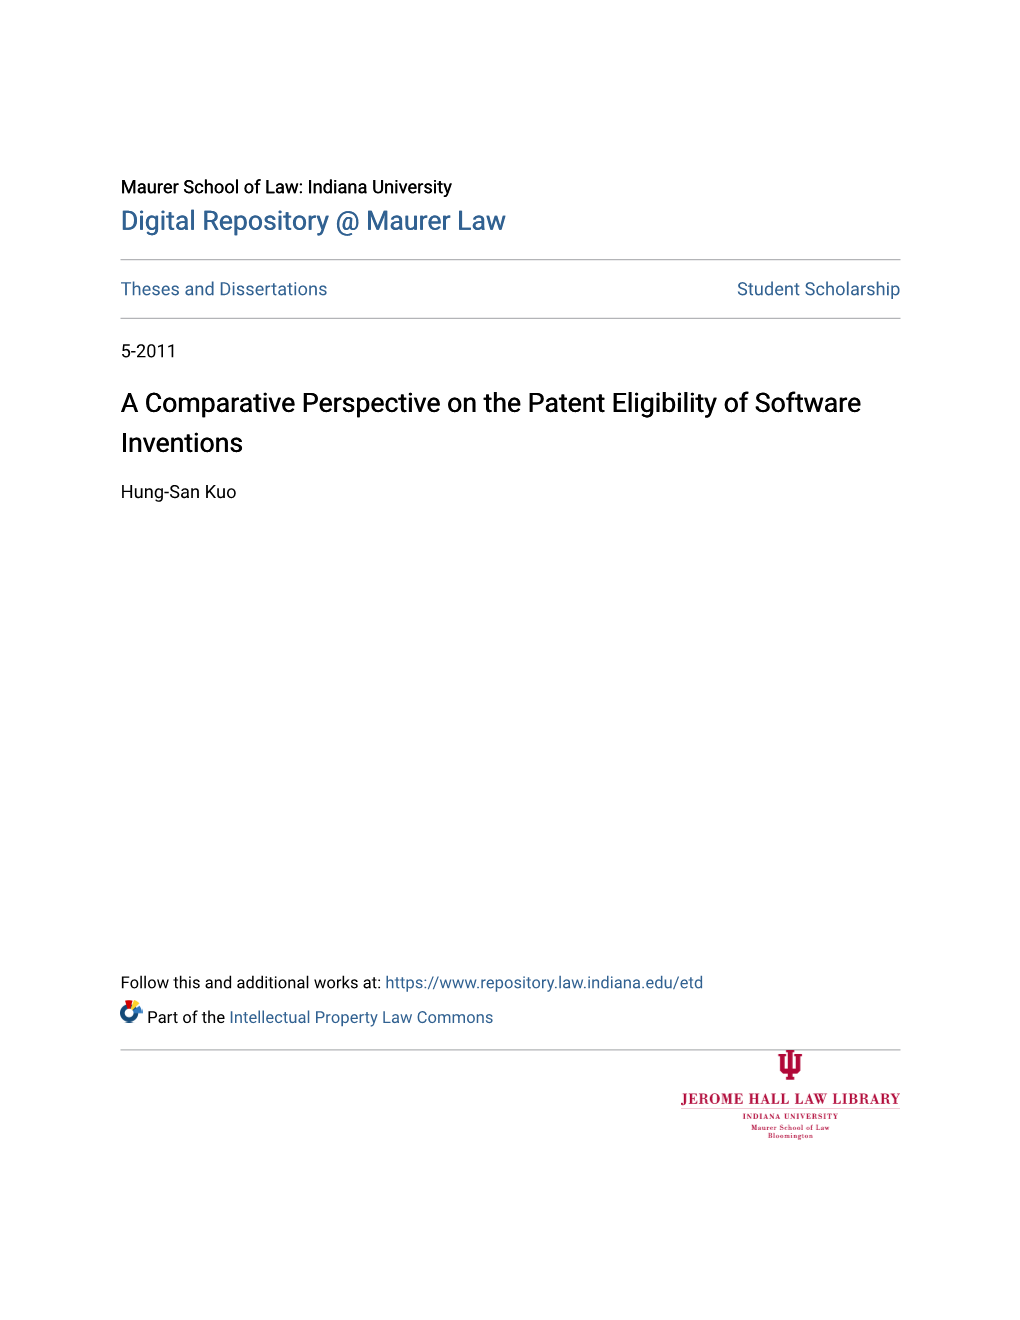 A Comparative Perspective on the Patent Eligibility of Software Inventions